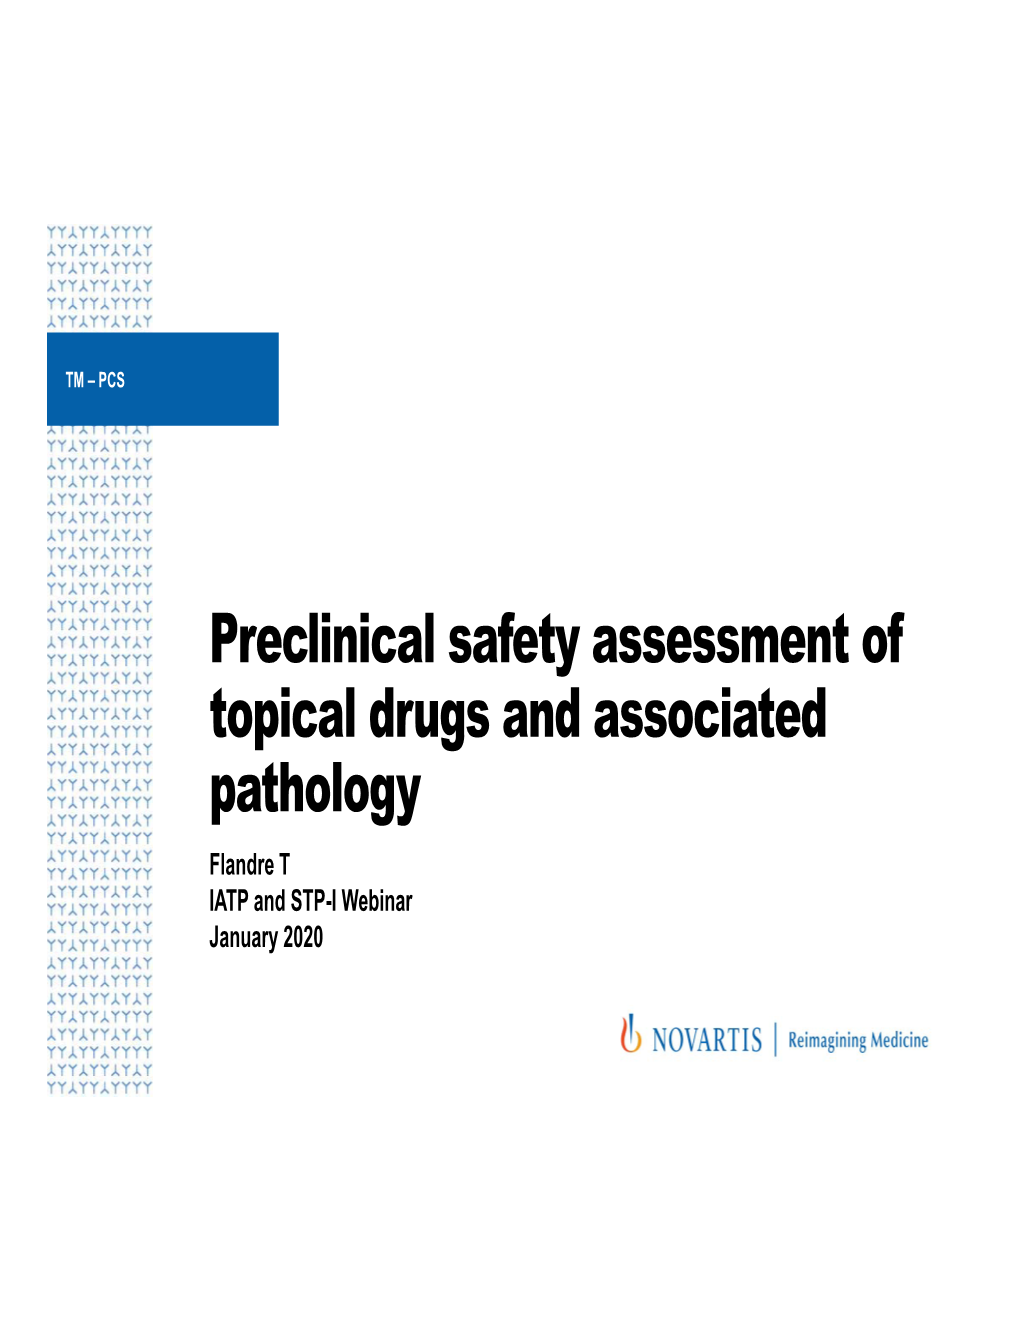 Preclinical Safety Assessment of Topical Drugs and Associated Pathology Flandre T IATP and STP-I Webinar January 2020 Agenda